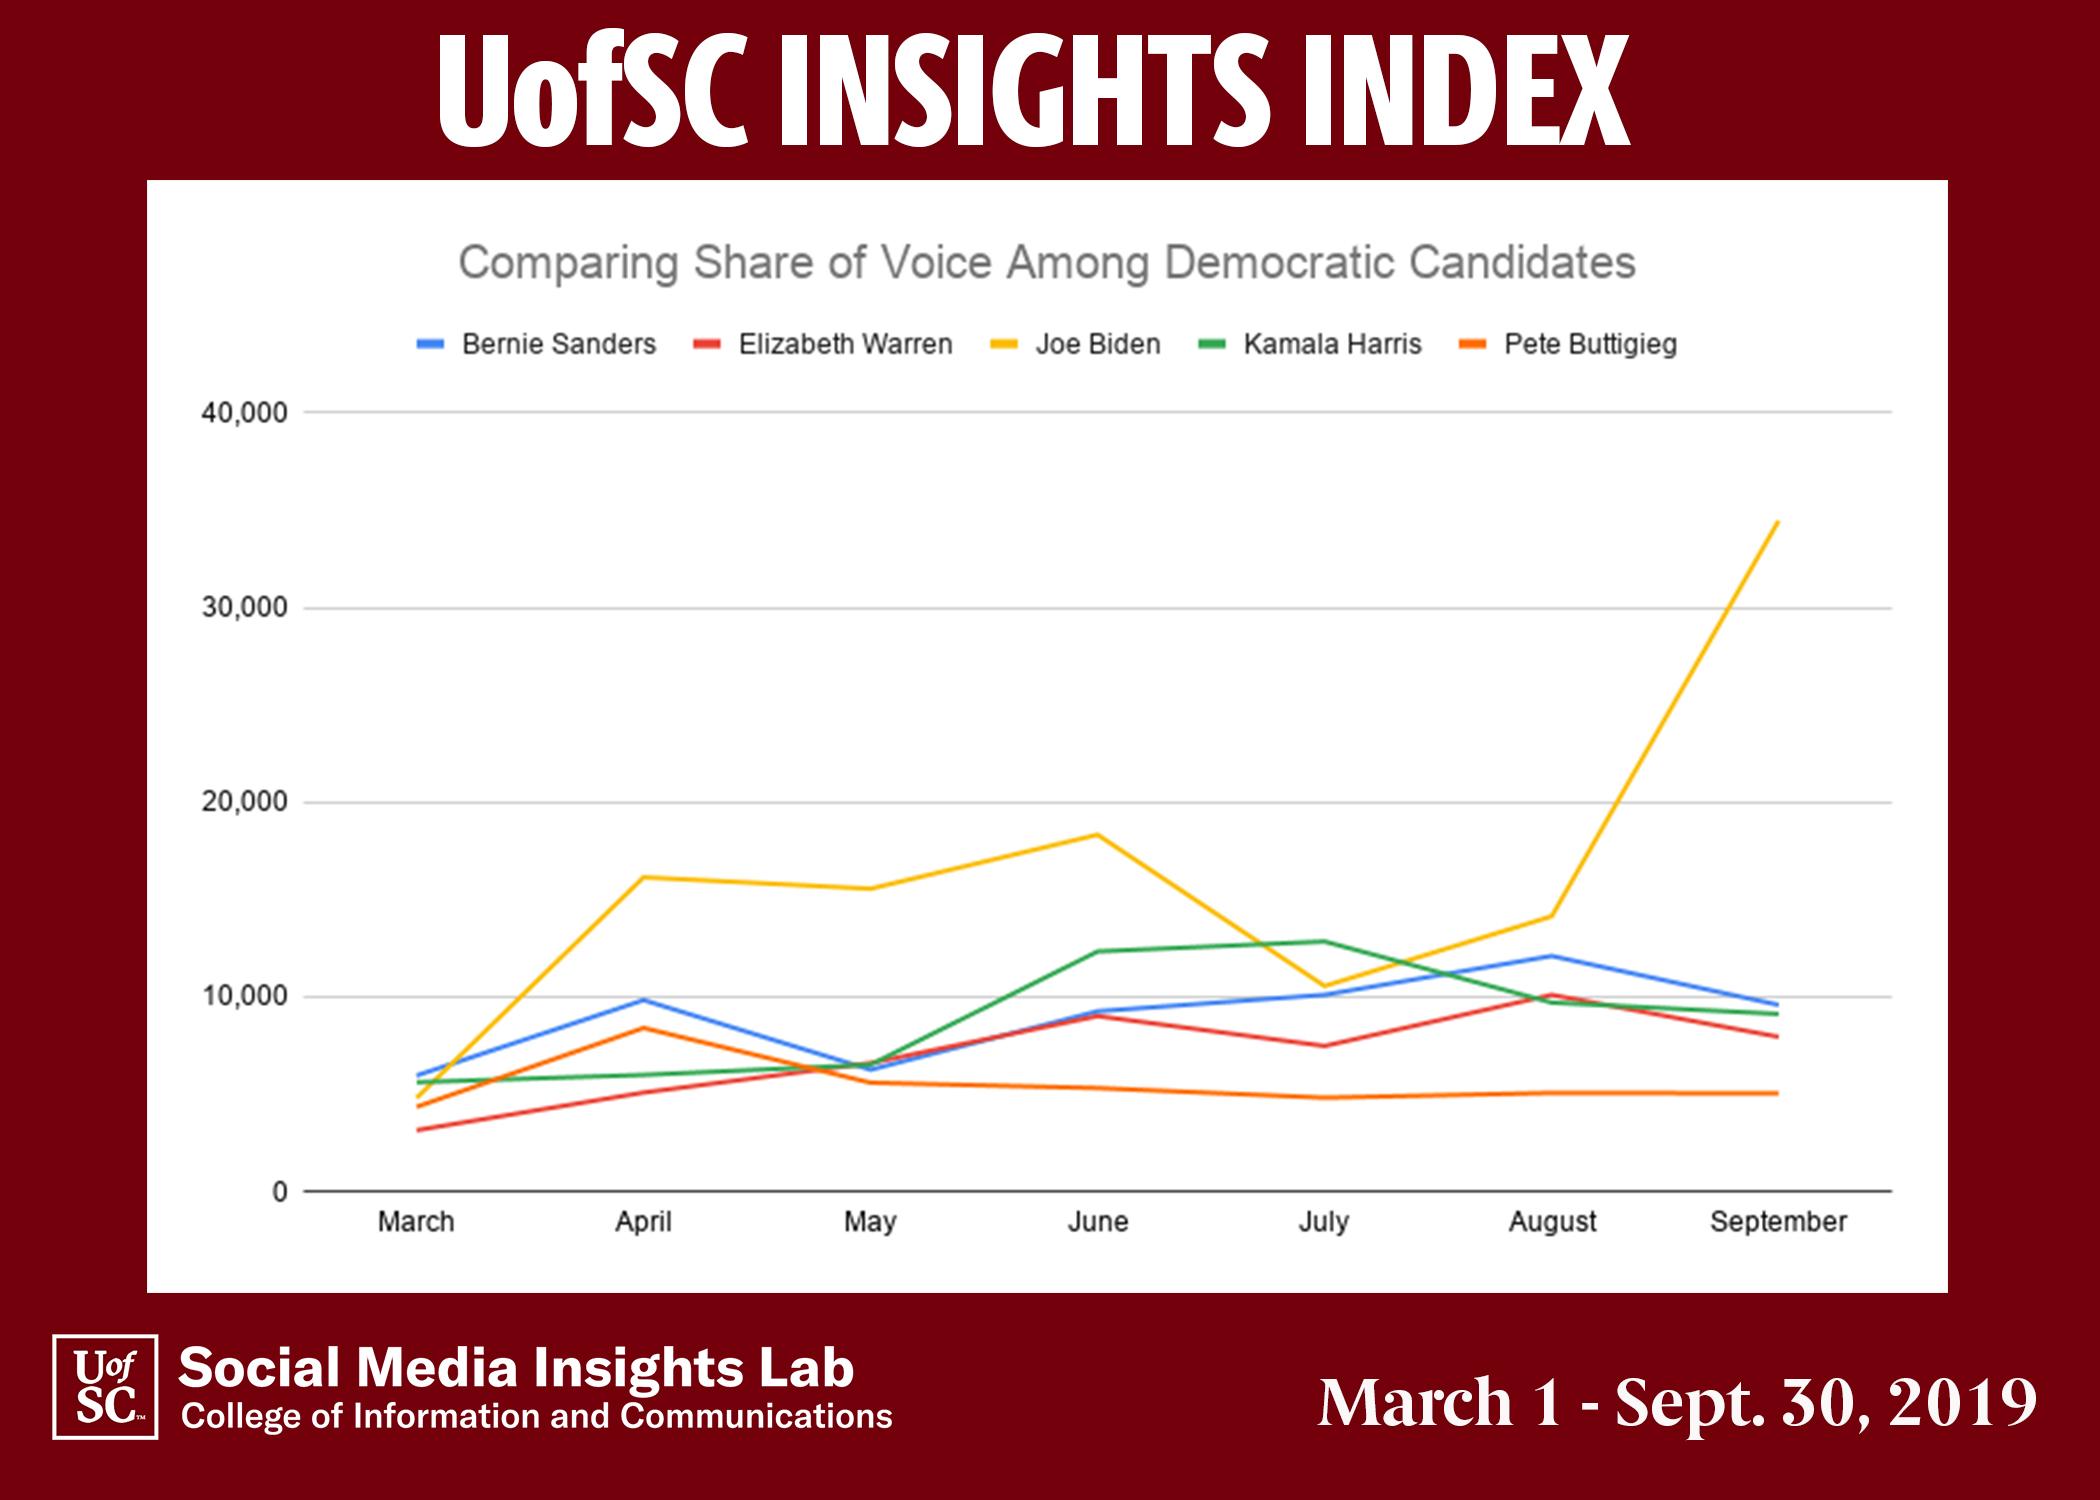 Looking at month to month, we see moments when other candidates have taken some of the spotlight on social in SC. In July and August, 
Joe Biden lost some of his lead in mentions on social. However, the Whistleblower complaint launched Biden back to the lead in share of voice.